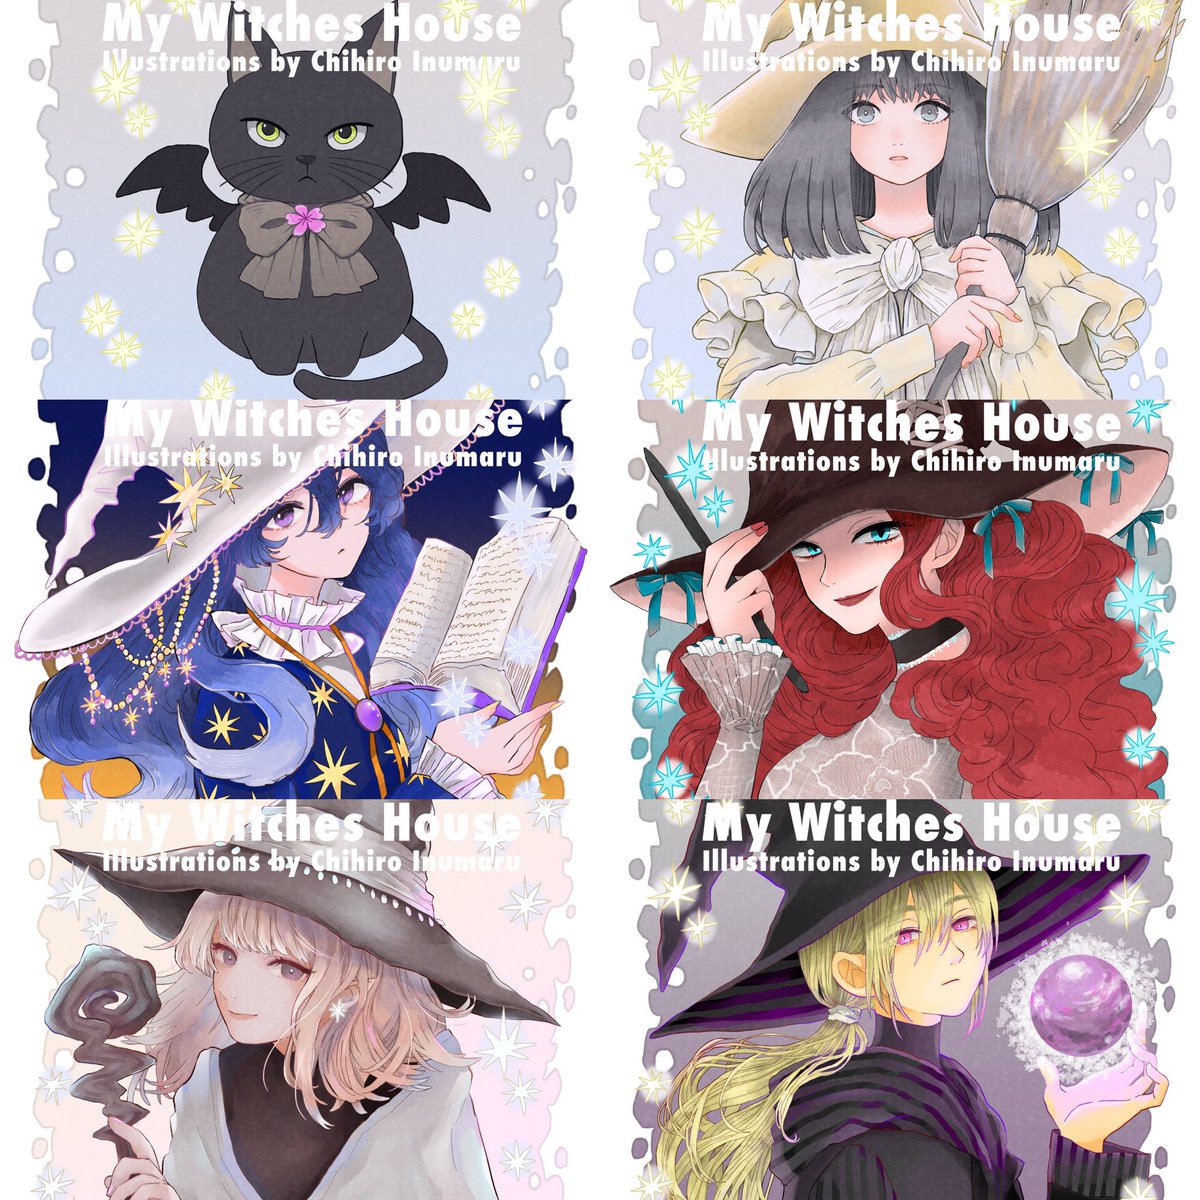 NFTコレクション▼
#MyWitchesHouse
魔女たち一覧▼
#MWHCharacters
10人記念 魔女のフリー壁紙▼
https://t.co/bjdwuiYxdN

「日陰のシャイが明日を愛する方法」
ちみし名義 Web漫画Kindle版▼
https://t.co/oXFF1DuEC3

通販(BOOTH)
原画、イラスト集、グッズ▼
https://t.co/2zL3s5T3h6 